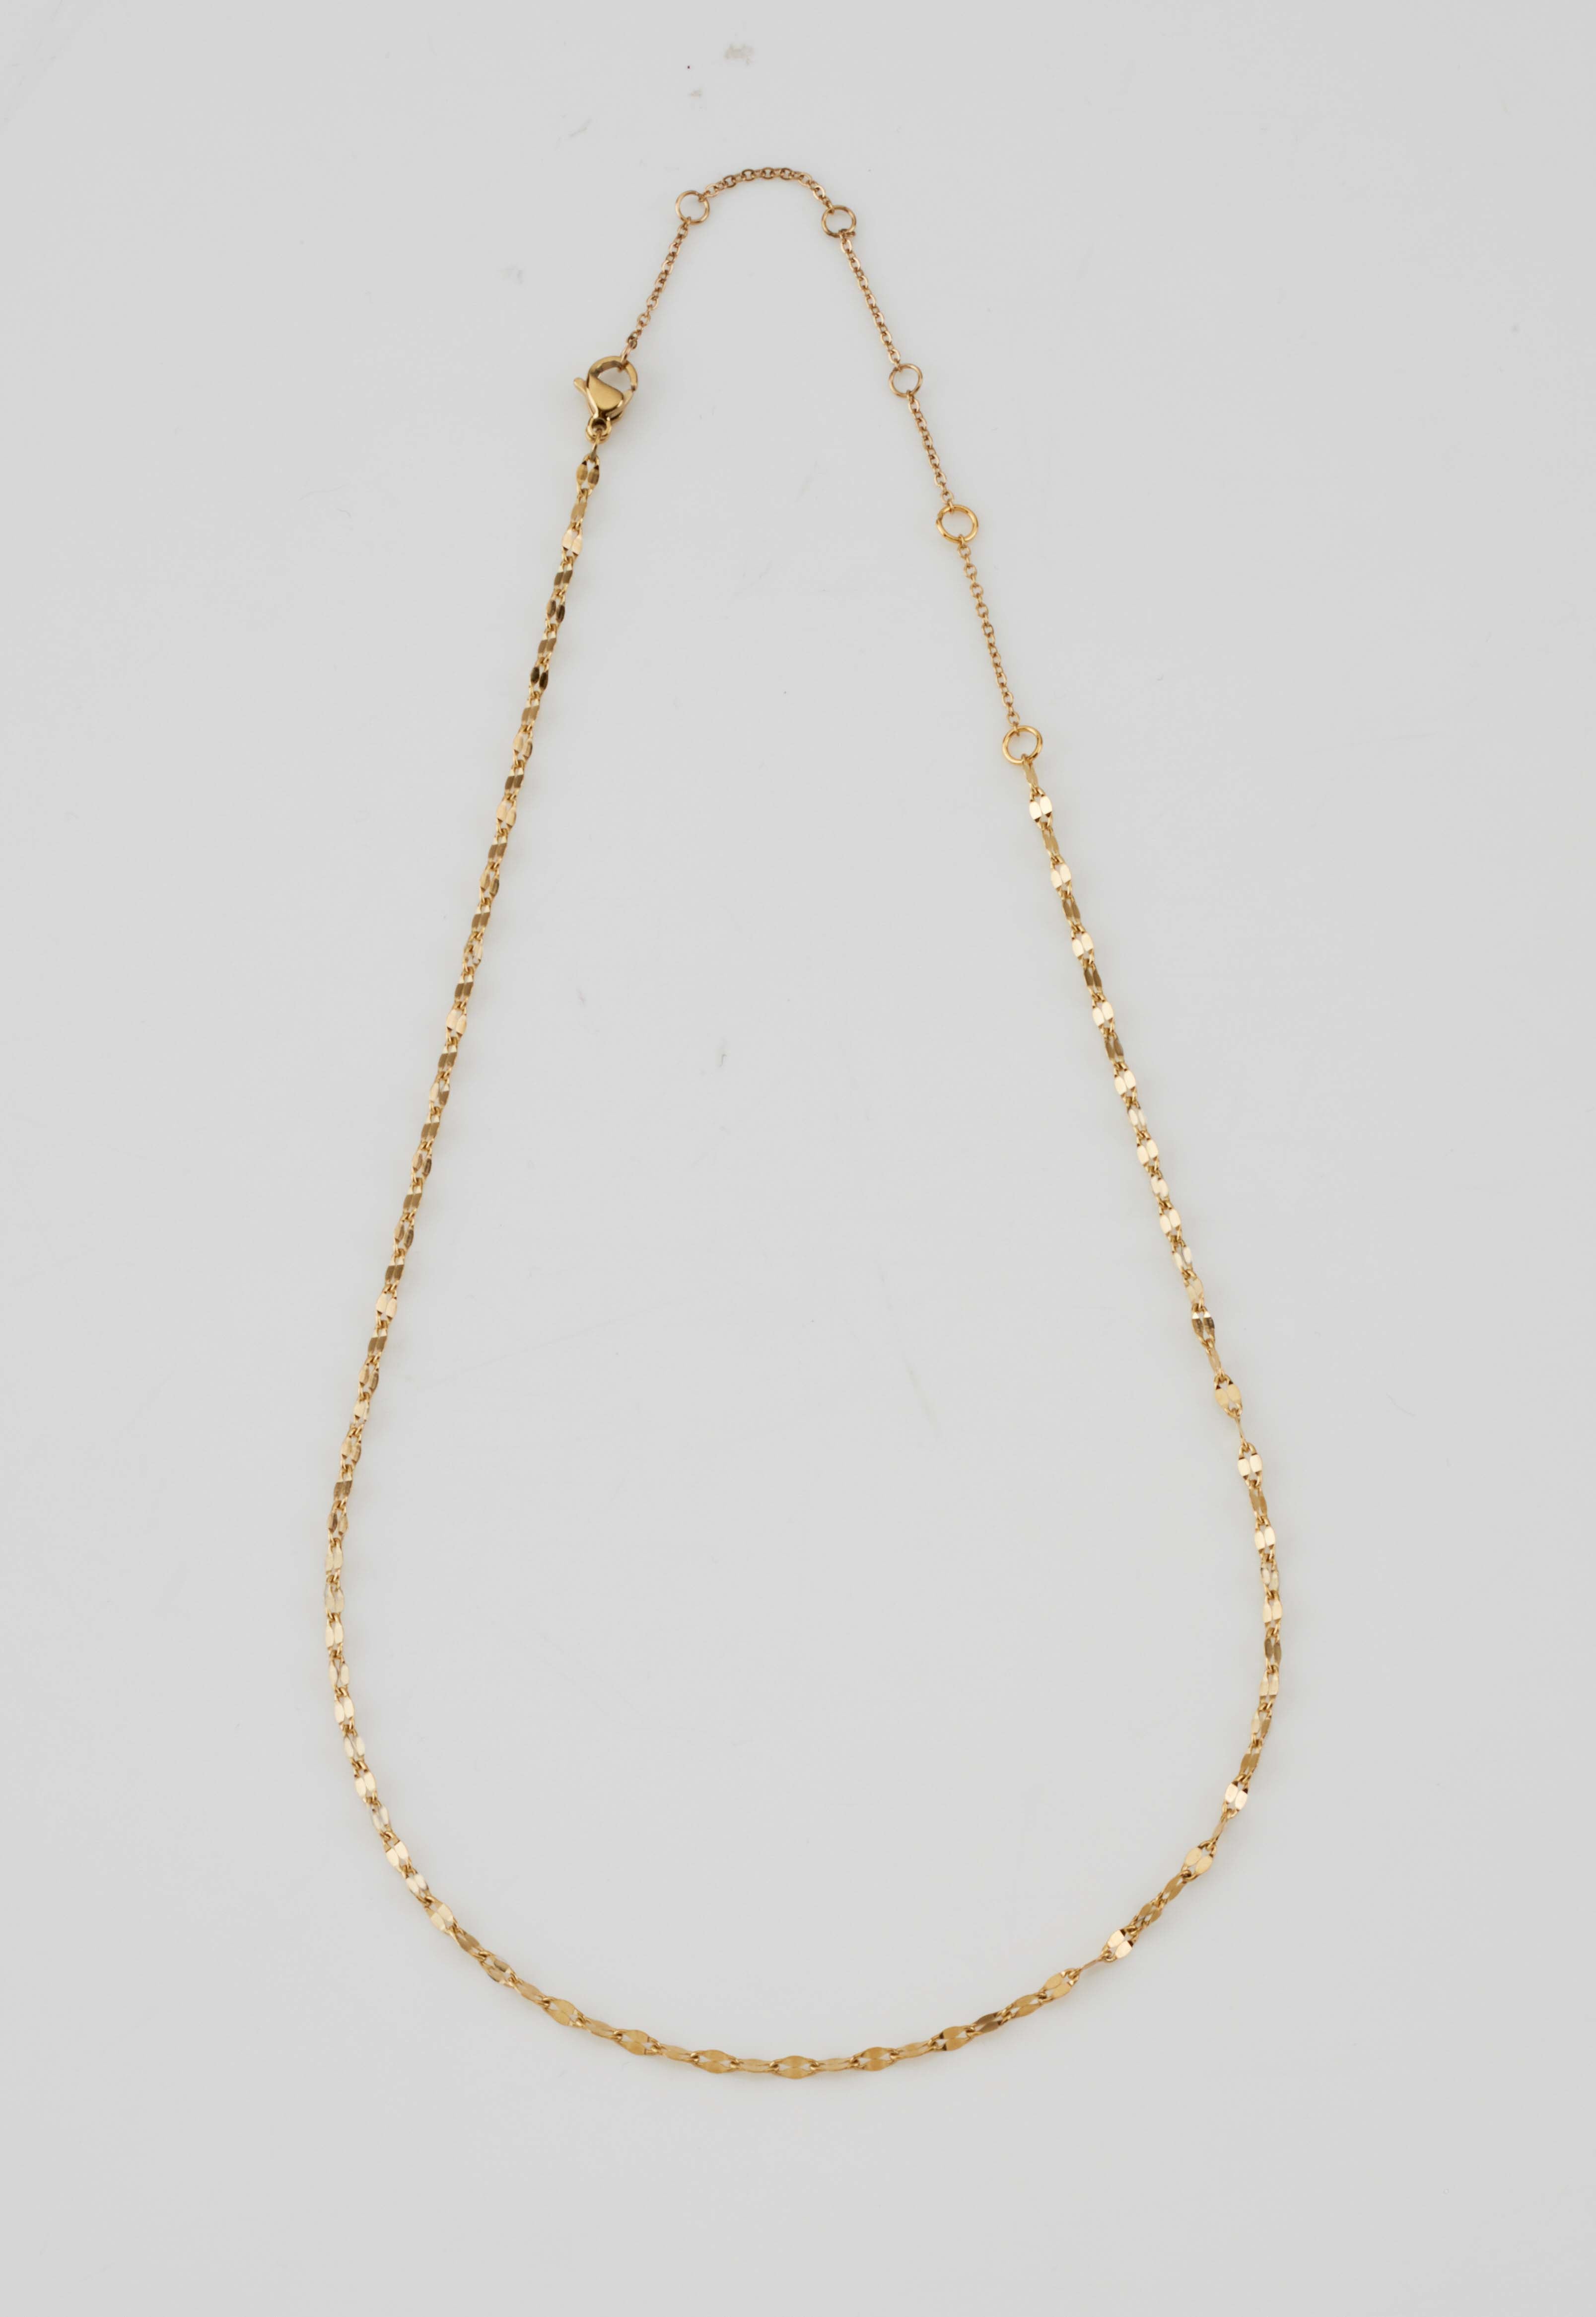 Chanel - 18k Gold Necklace - Ocean Wave Jewelry